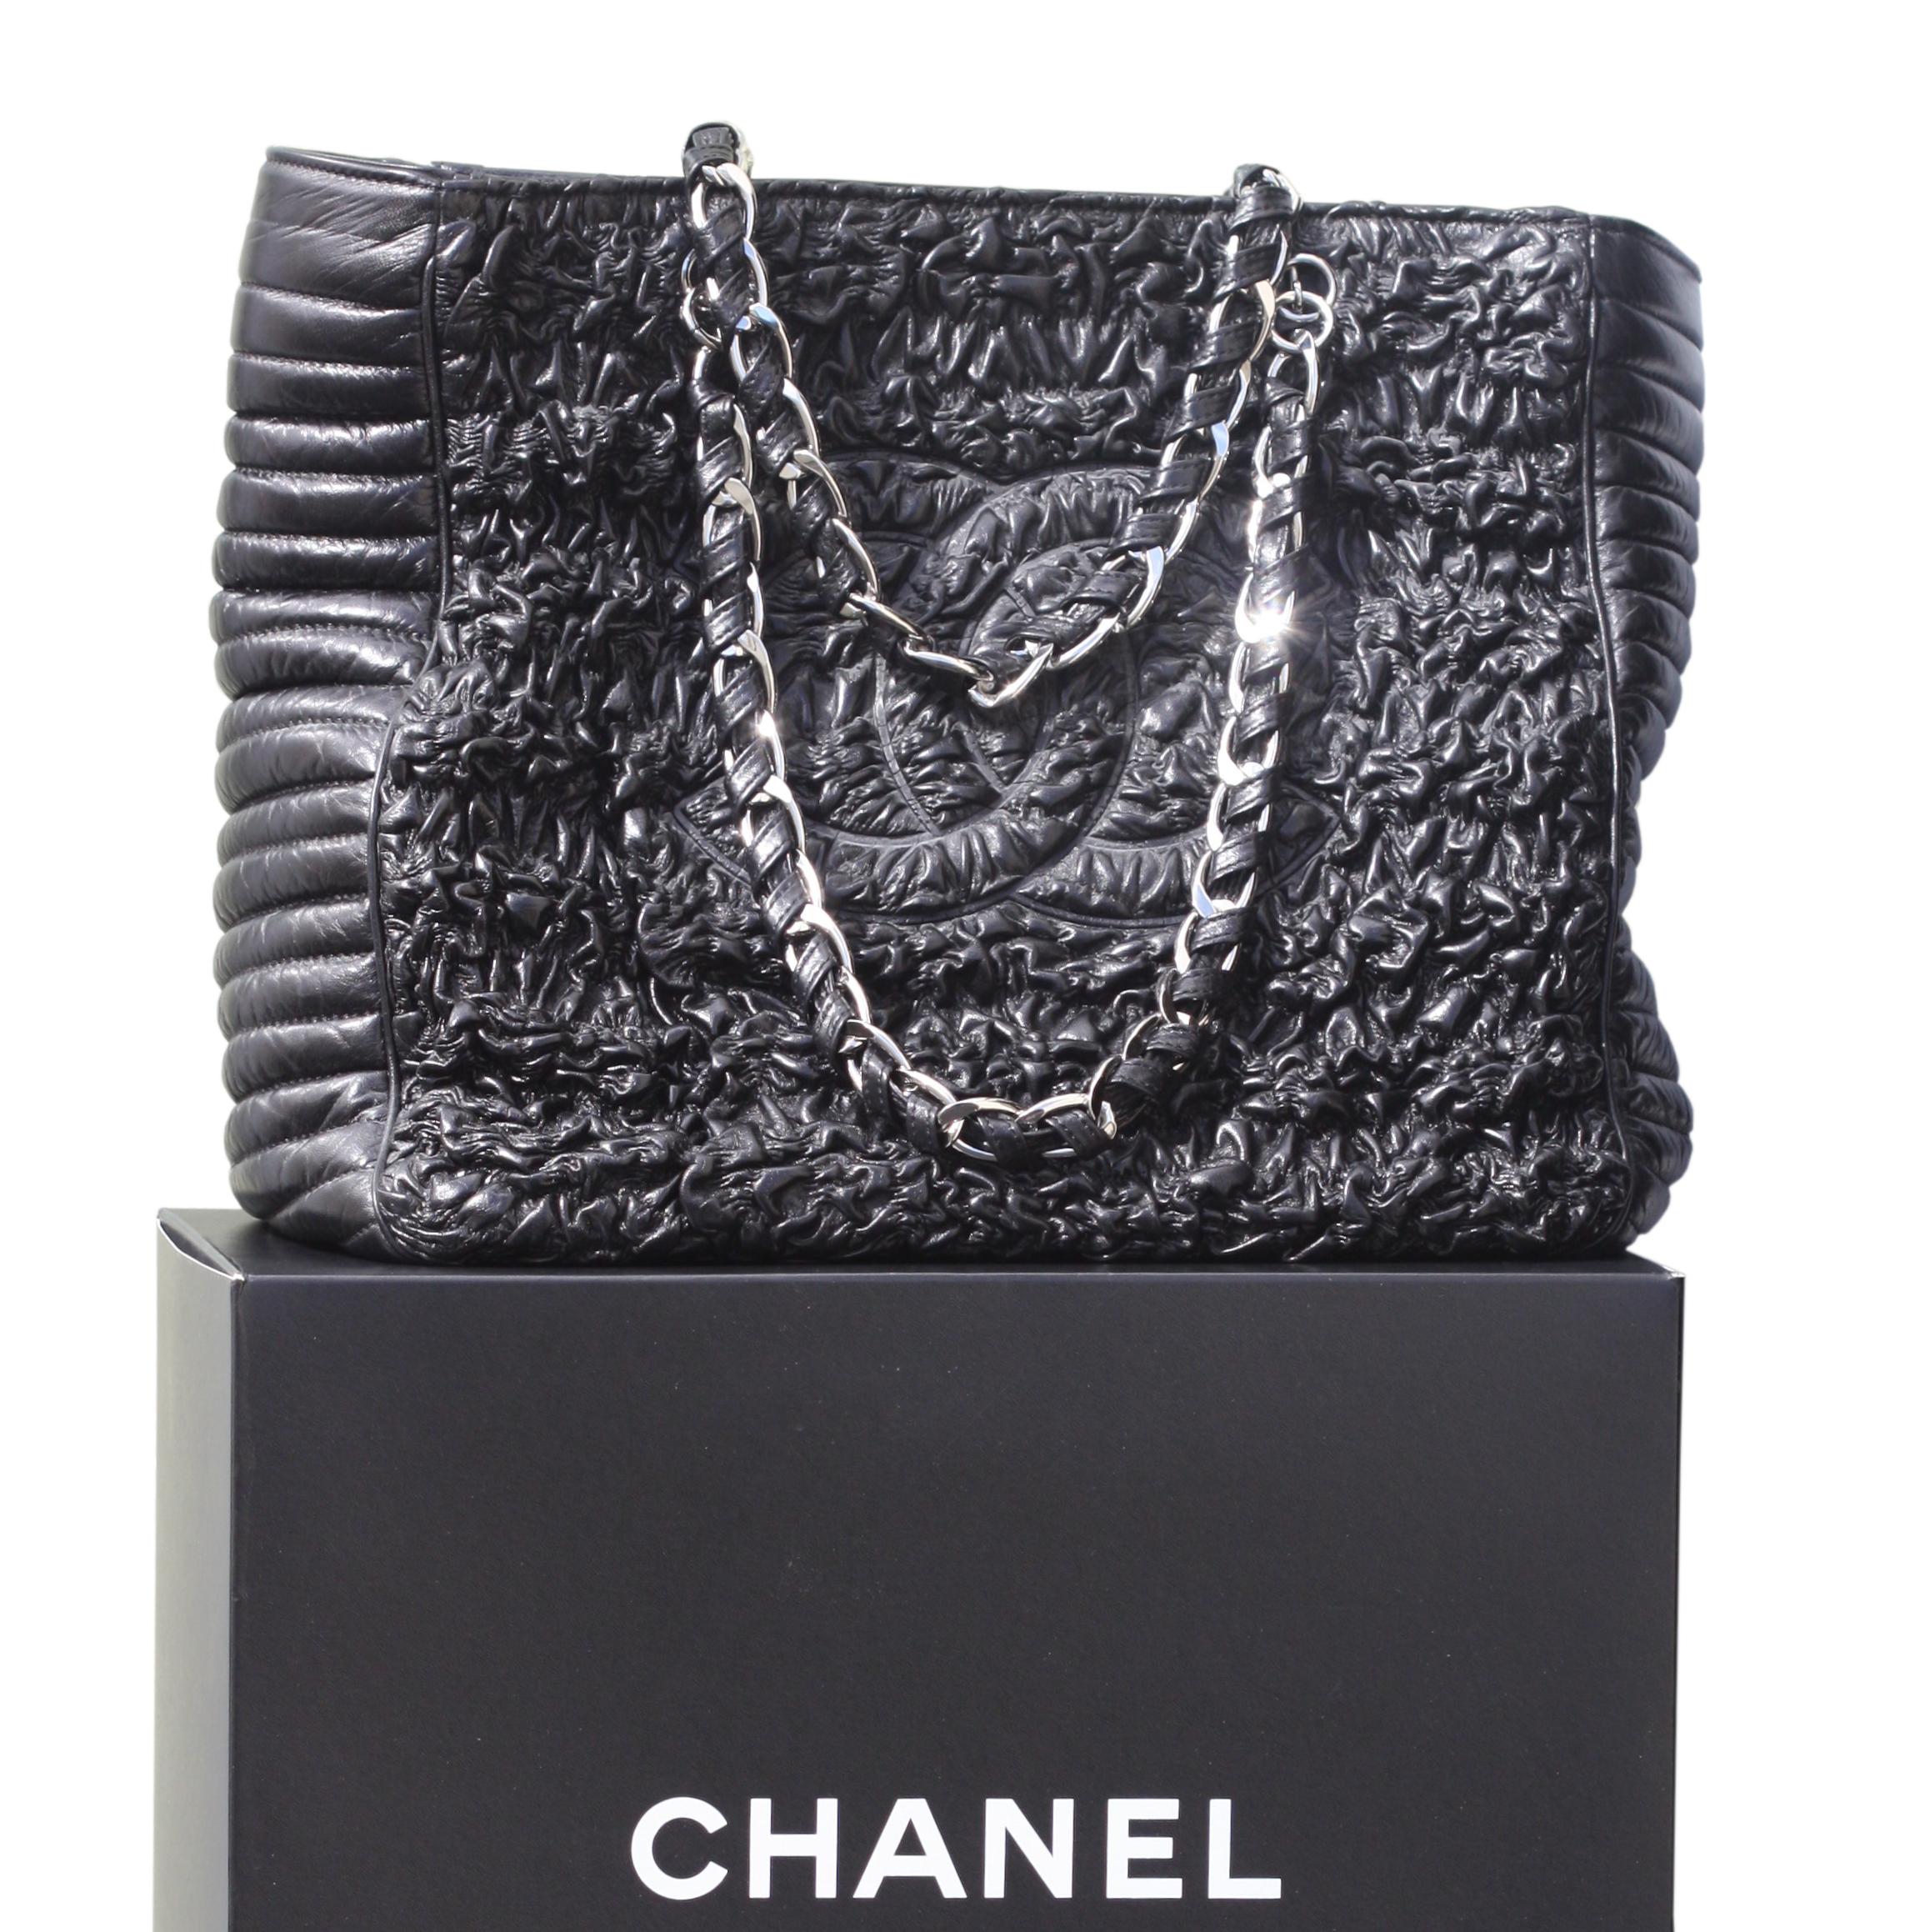 
Chanel Astrakhan Black Leather Ruched Shopping Tote, Limited Edition
Leather ruched astrakhan front and back with CC quilted along both sides
Striped quilted pattern along sides and base
Top double leather wrapped and woven chain handles
Top zip